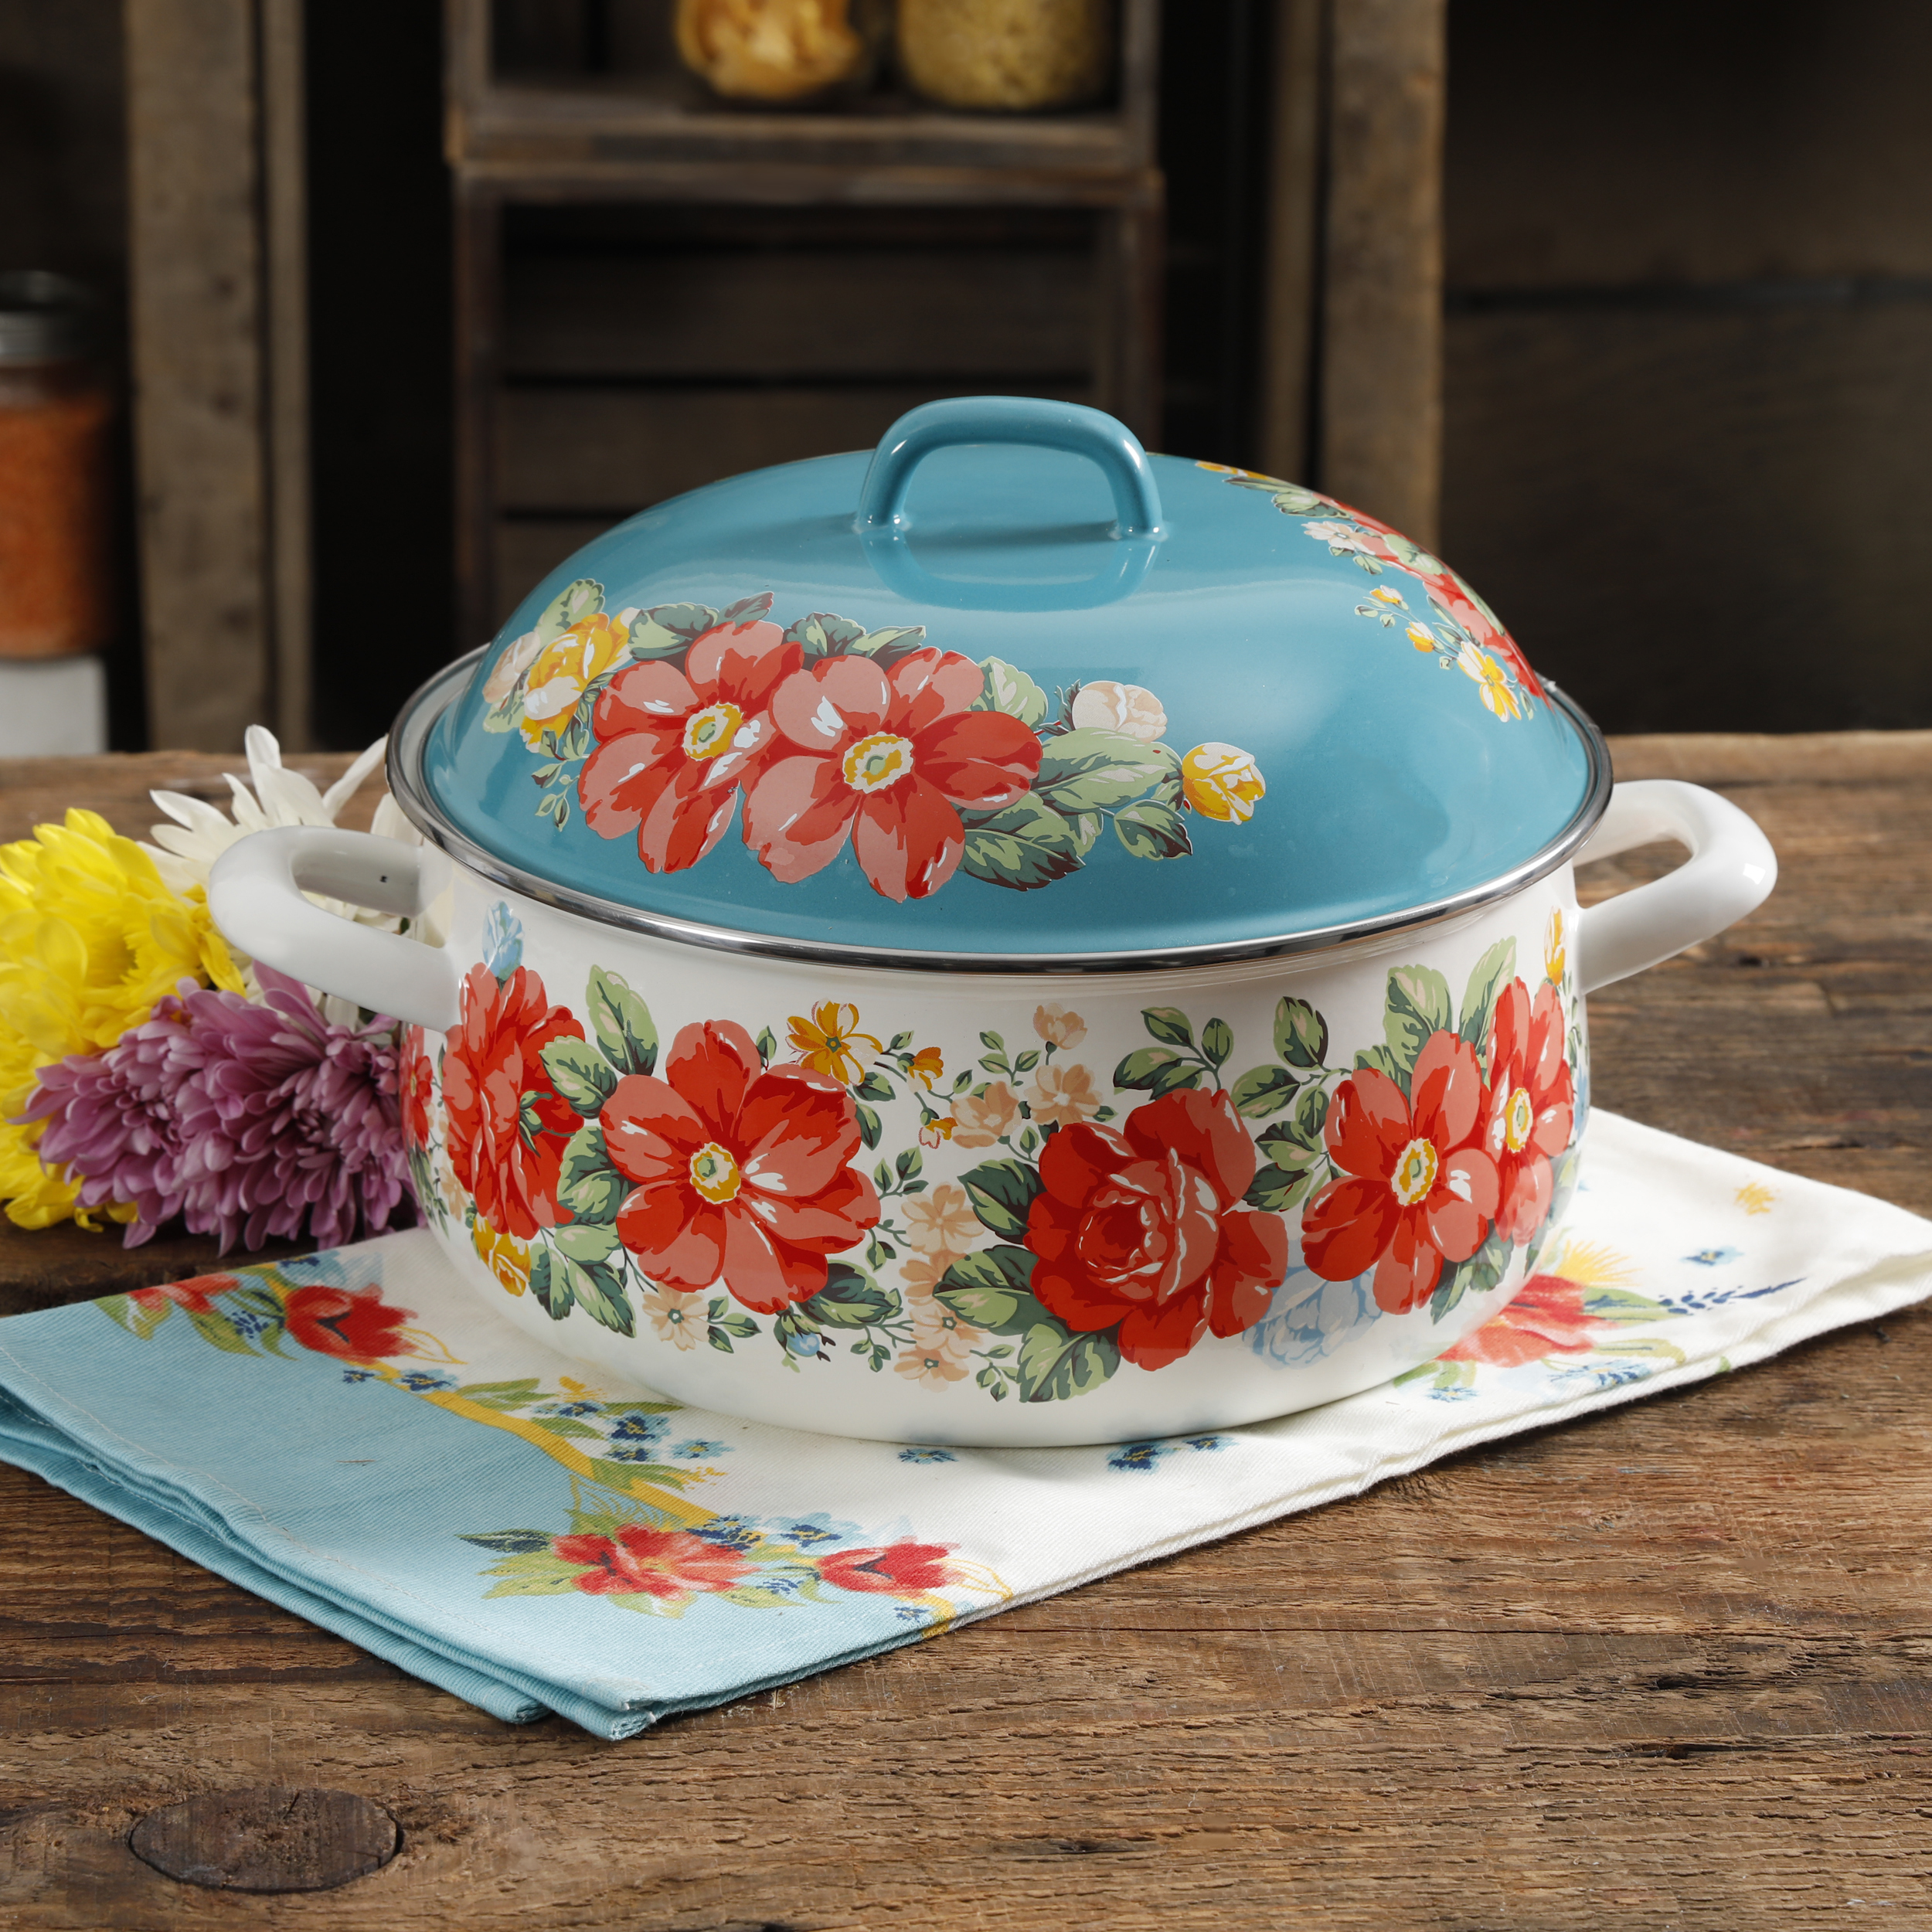 The Pioneer Woman Vintage Floral 4 Quart Dutch Oven with Lid Only $19.72!